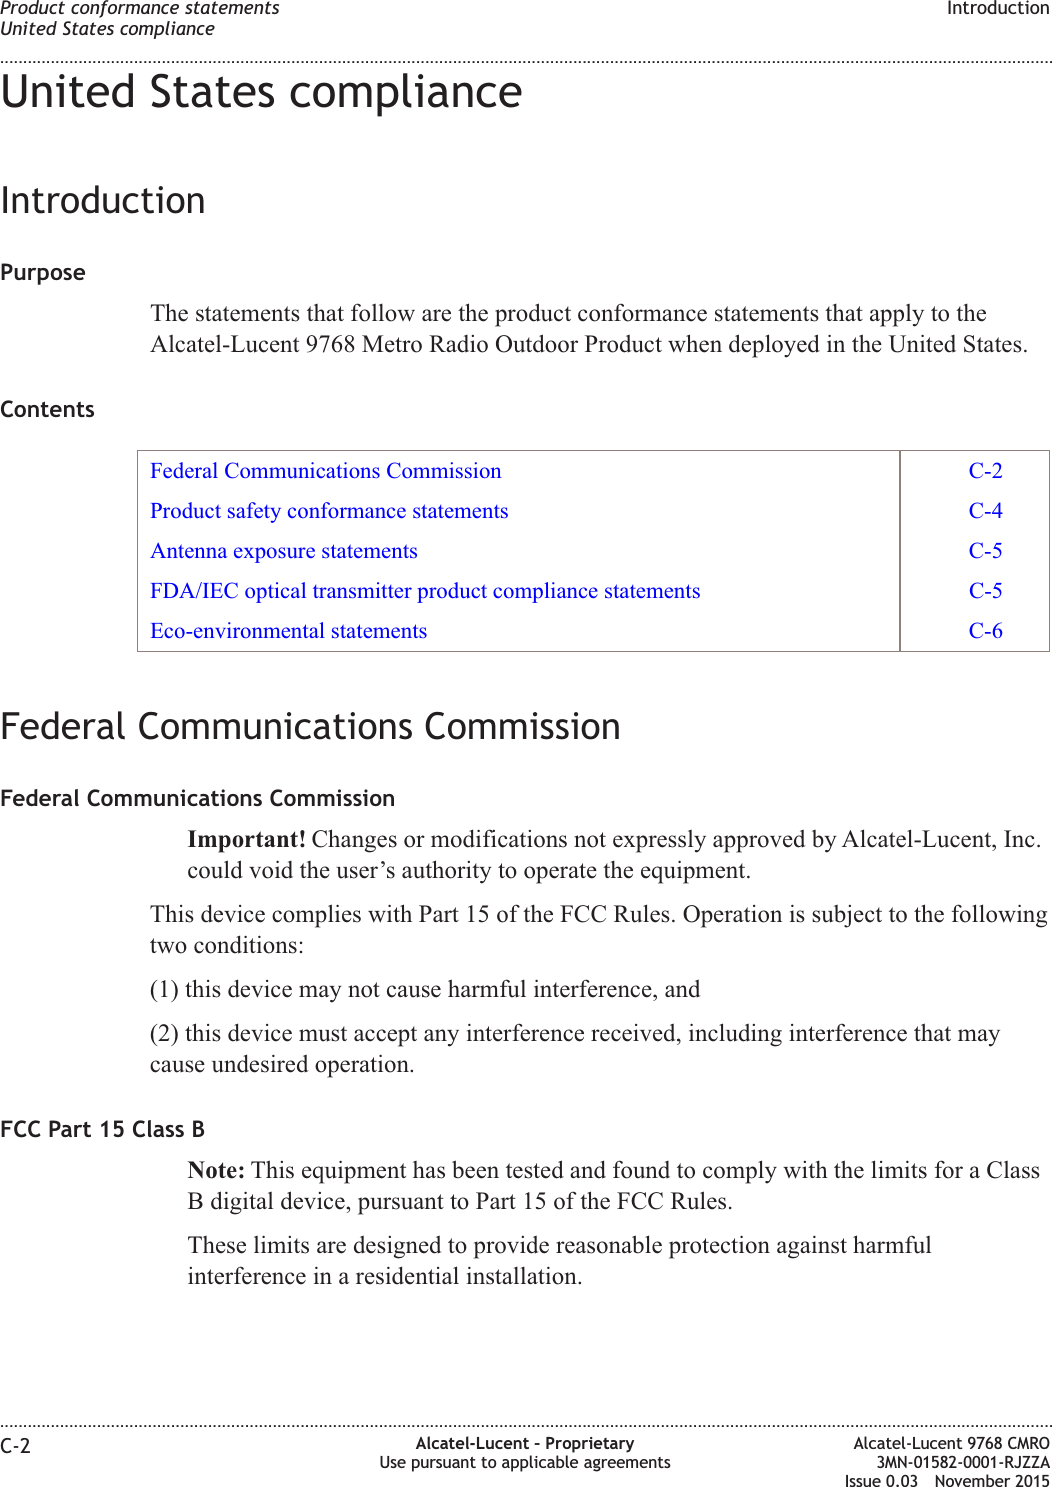 United States complianceIntroductionPurposeThe statements that follow are the product conformance statements that apply to theAlcatel-Lucent 9768 Metro Radio Outdoor Product when deployed in the United States.ContentsFederal Communications Commission C-2Product safety conformance statements C-4Antenna exposure statements C-5FDA/IEC optical transmitter product compliance statements C-5Eco-environmental statements C-6Federal Communications CommissionFederal Communications CommissionImportant! Changes or modifications not expressly approved by Alcatel-Lucent, Inc.could void the user’s authority to operate the equipment.This device complies with Part 15 of the FCC Rules. Operation is subject to the followingtwo conditions:(1) this device may not cause harmful interference, and(2) this device must accept any interference received, including interference that maycause undesired operation.FCC Part 15 Class BNote: This equipment has been tested and found to comply with the limits for a ClassB digital device, pursuant to Part 15 of the FCC Rules.These limits are designed to provide reasonable protection against harmfulinterference in a residential installation.Product conformance statementsUnited States complianceIntroduction........................................................................................................................................................................................................................................................................................................................................................................................................................................................................C-2 Alcatel-Lucent – ProprietaryUse pursuant to applicable agreementsAlcatel-Lucent 9768 CMRO3MN-01582-0001-RJZZAIssue 0.03 November 2015DRAFTDRAFT